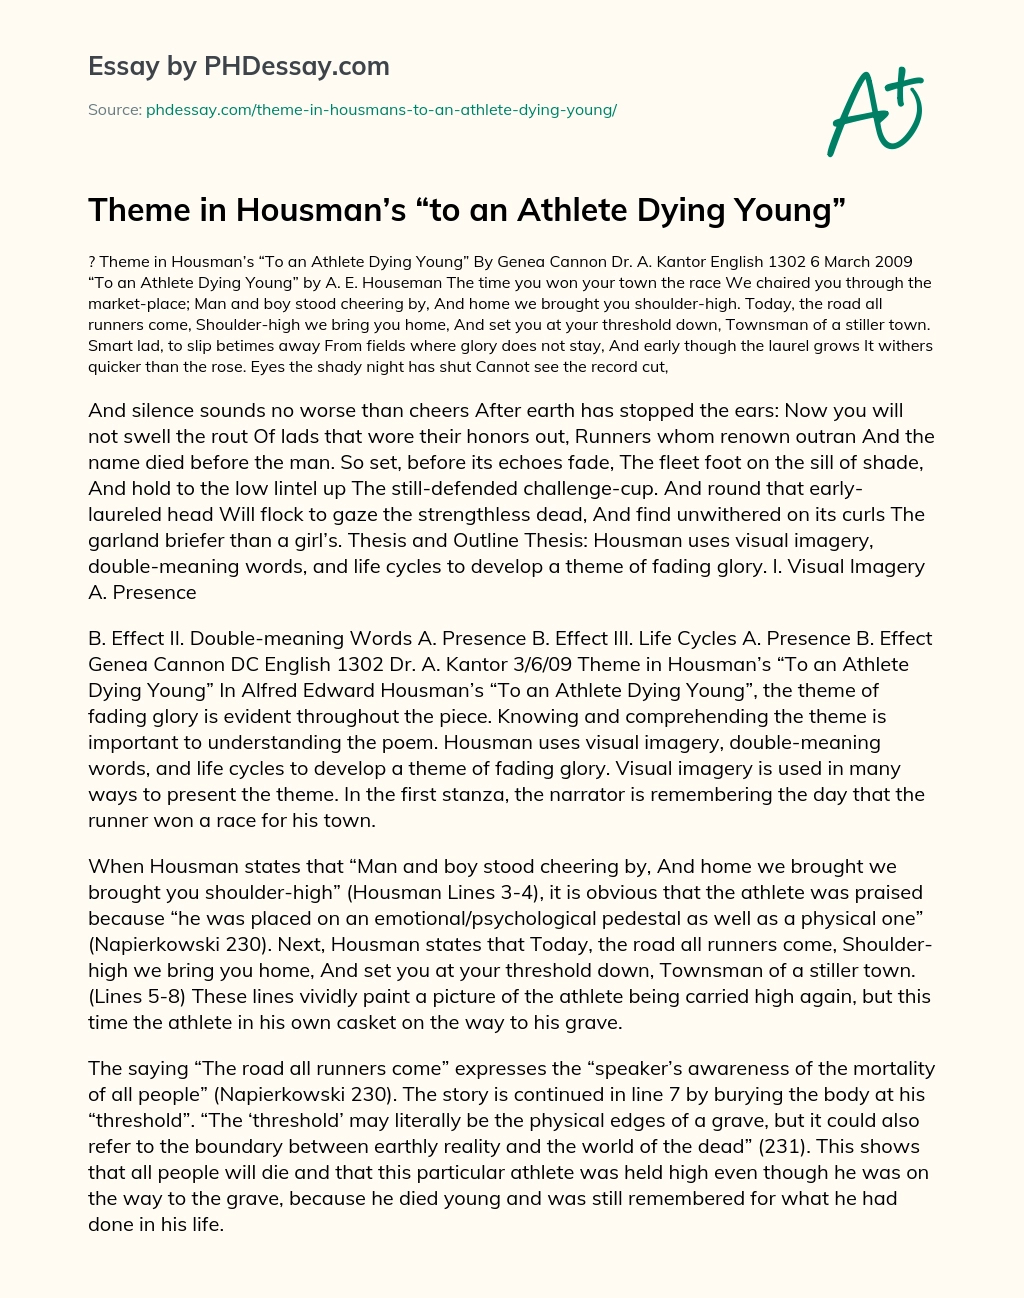 housman to an athlete dying young